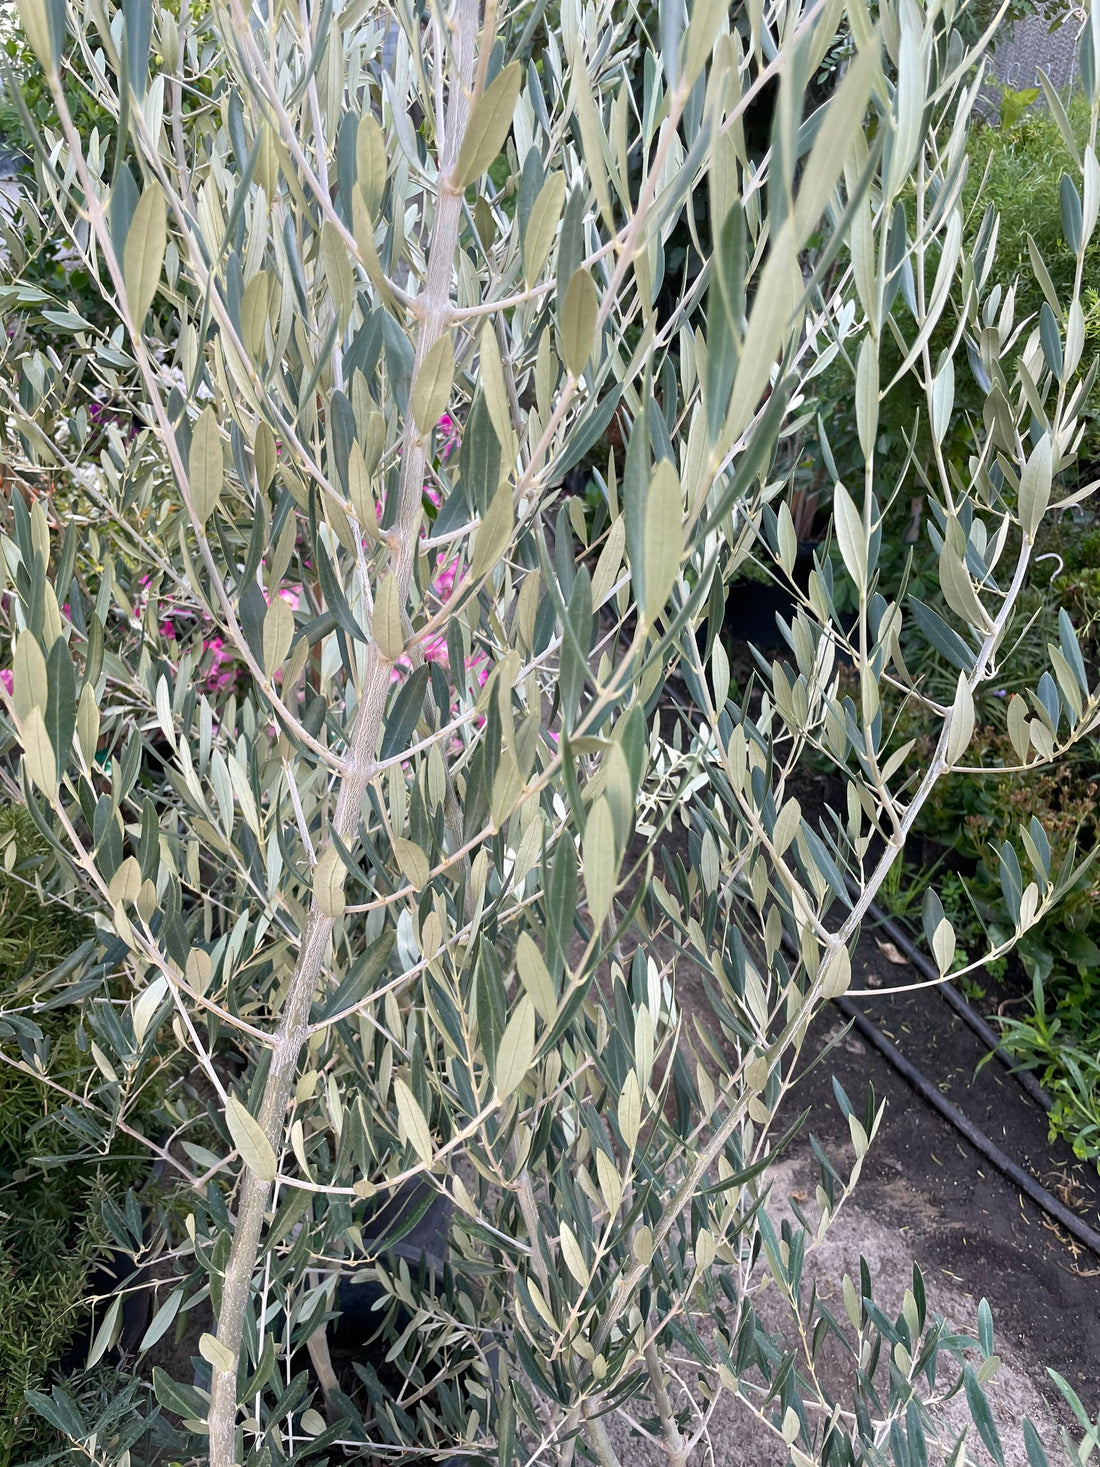 XXXL -6-7ft- Fruiting Size!!!! Live olive tree -ships in growers pot-Indoors/outdoors-easy care -hard to find this size-Arbequina Olive Tree